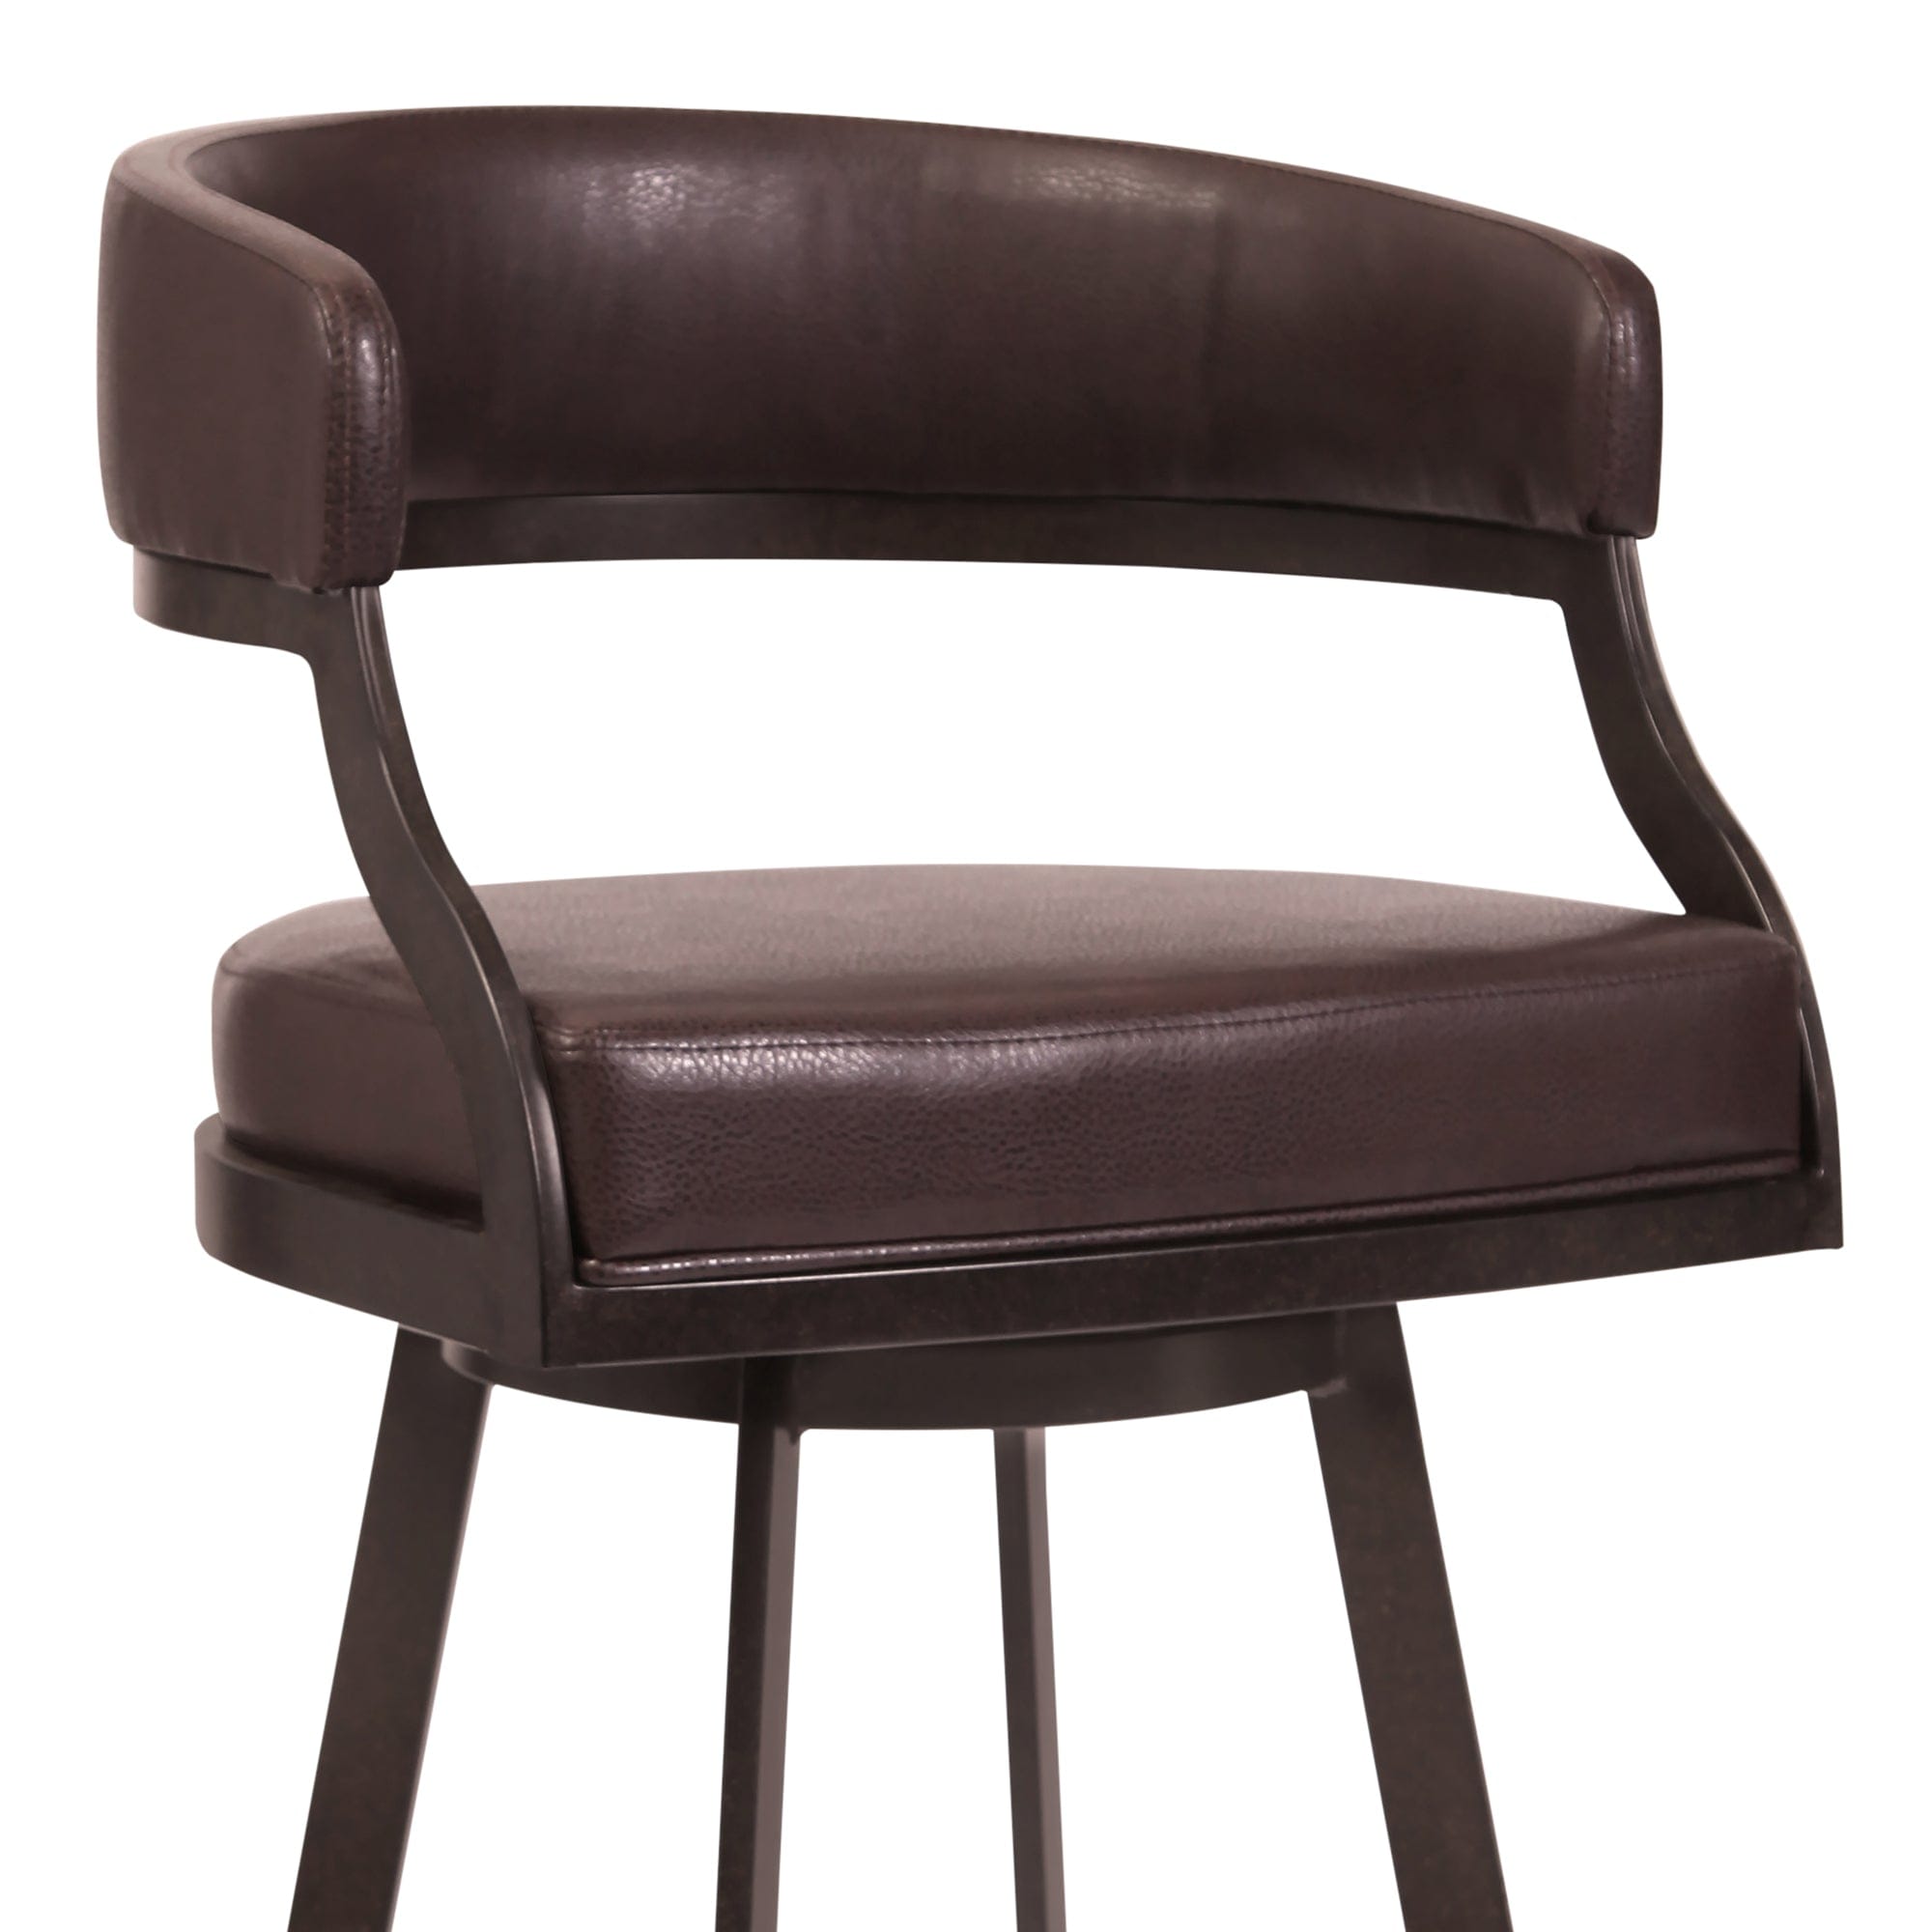 Armen Living Barstool Armen Living - Dione 26" Counter Height Barstool in Auburn Bay and Brown Faux Leather | 721535746927